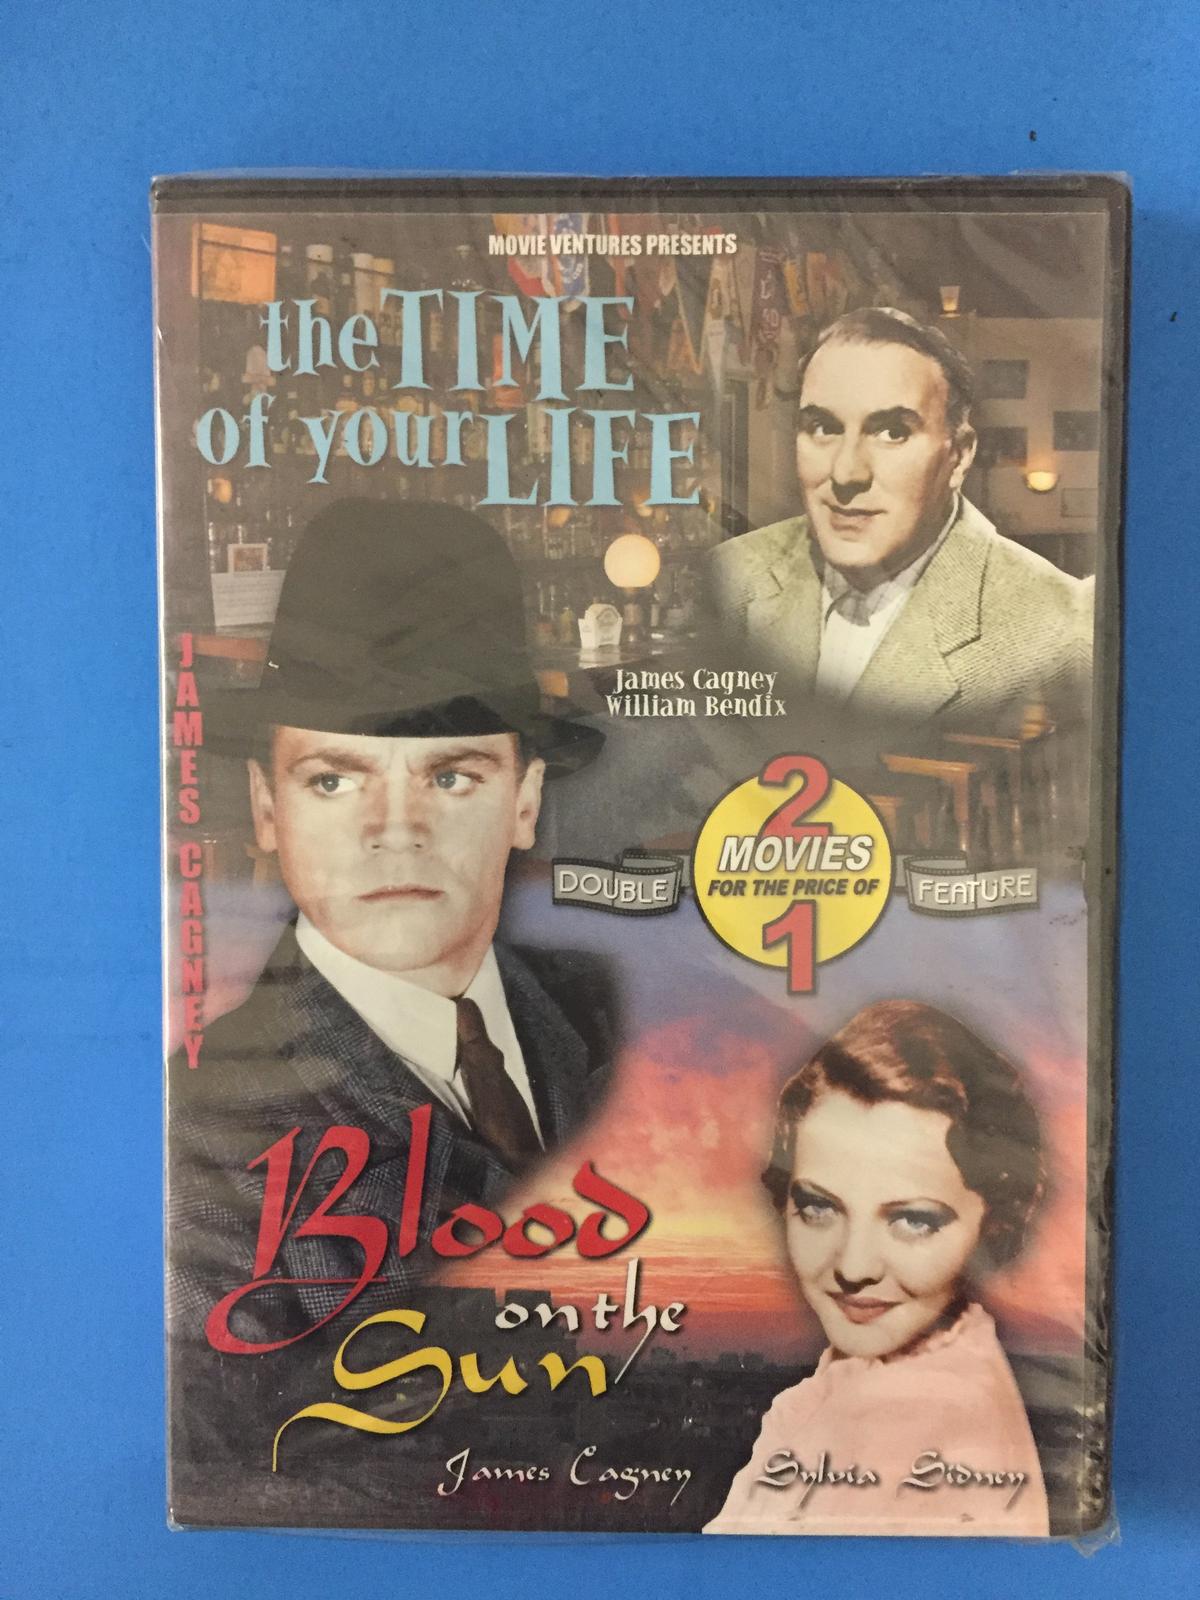 BRAND NEW SEALED Double Feature: The Time of Your Life & Blood On the Sun DVD